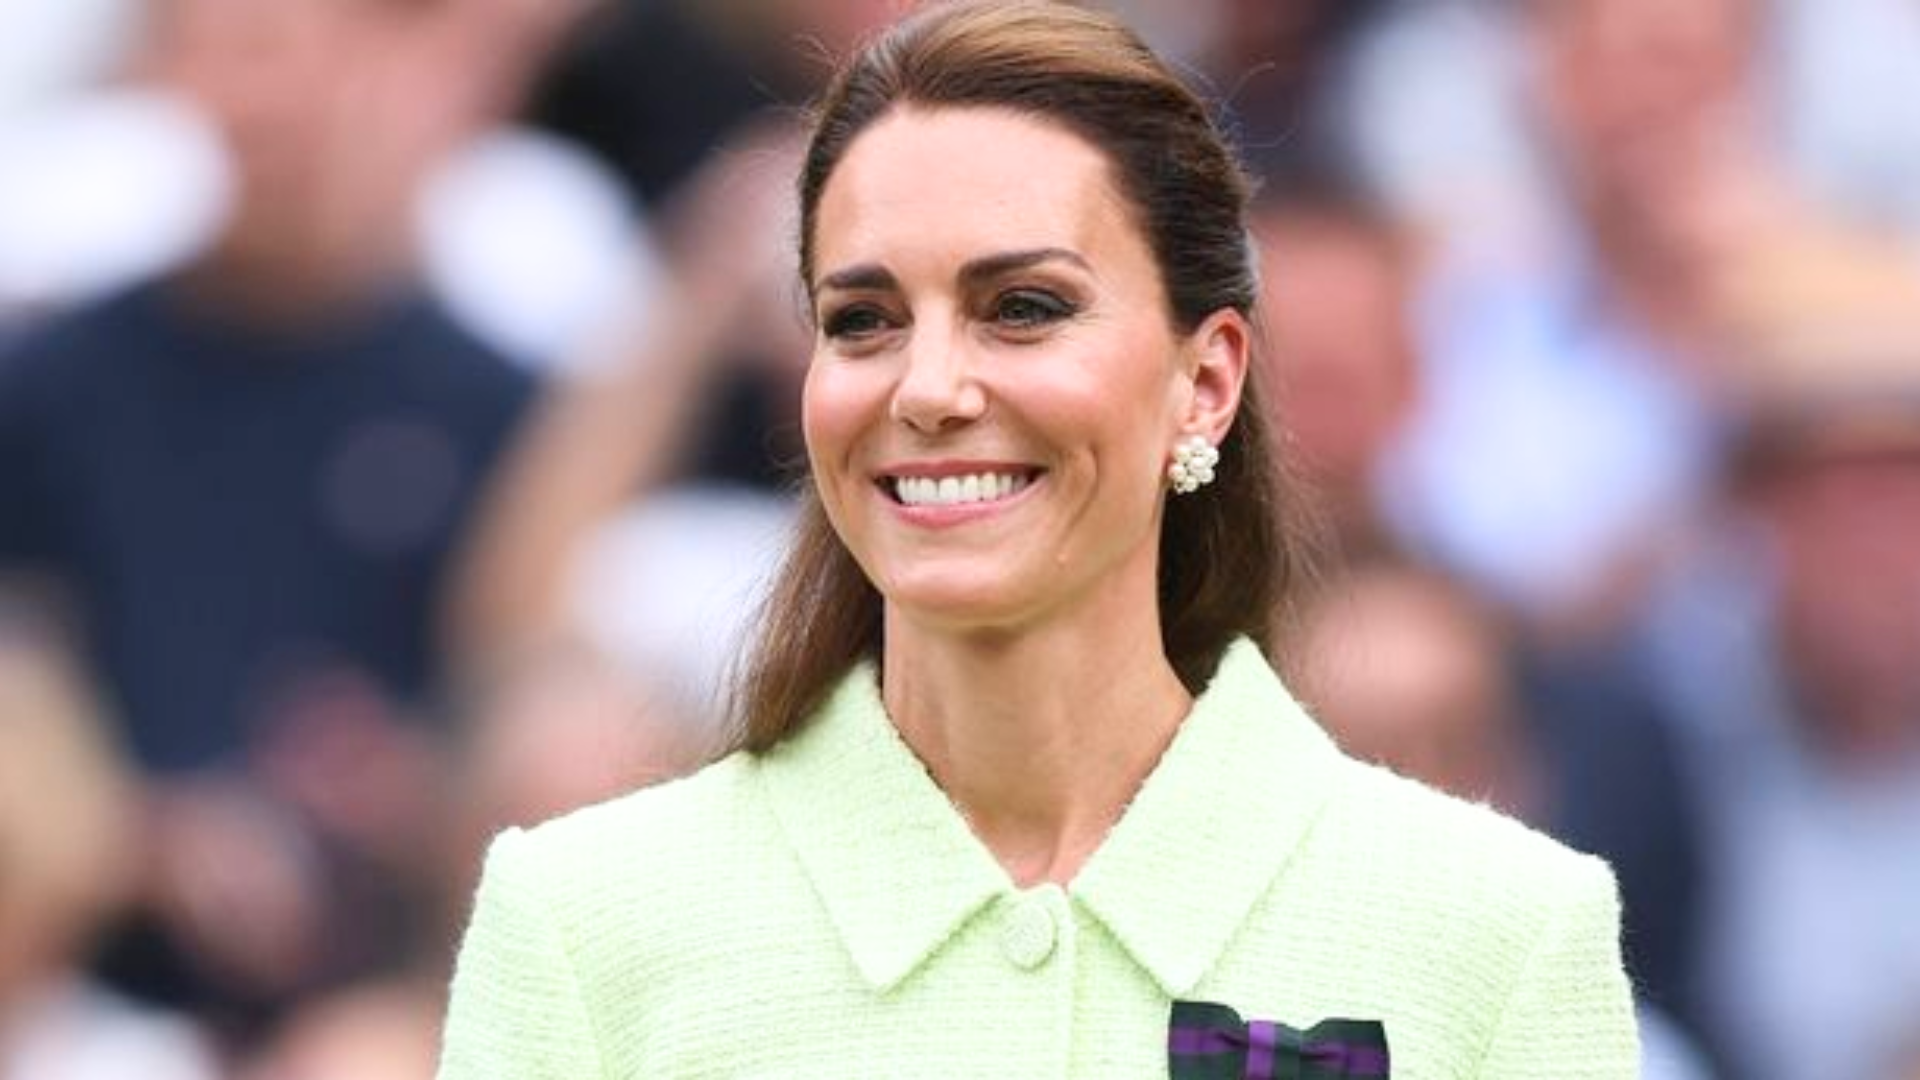 Kate Middleton’s Cancer Reveal Video Gets Dubbed As “AI” By The Internet As Boris Johnson, Justin Trudeau Send Their Wishes